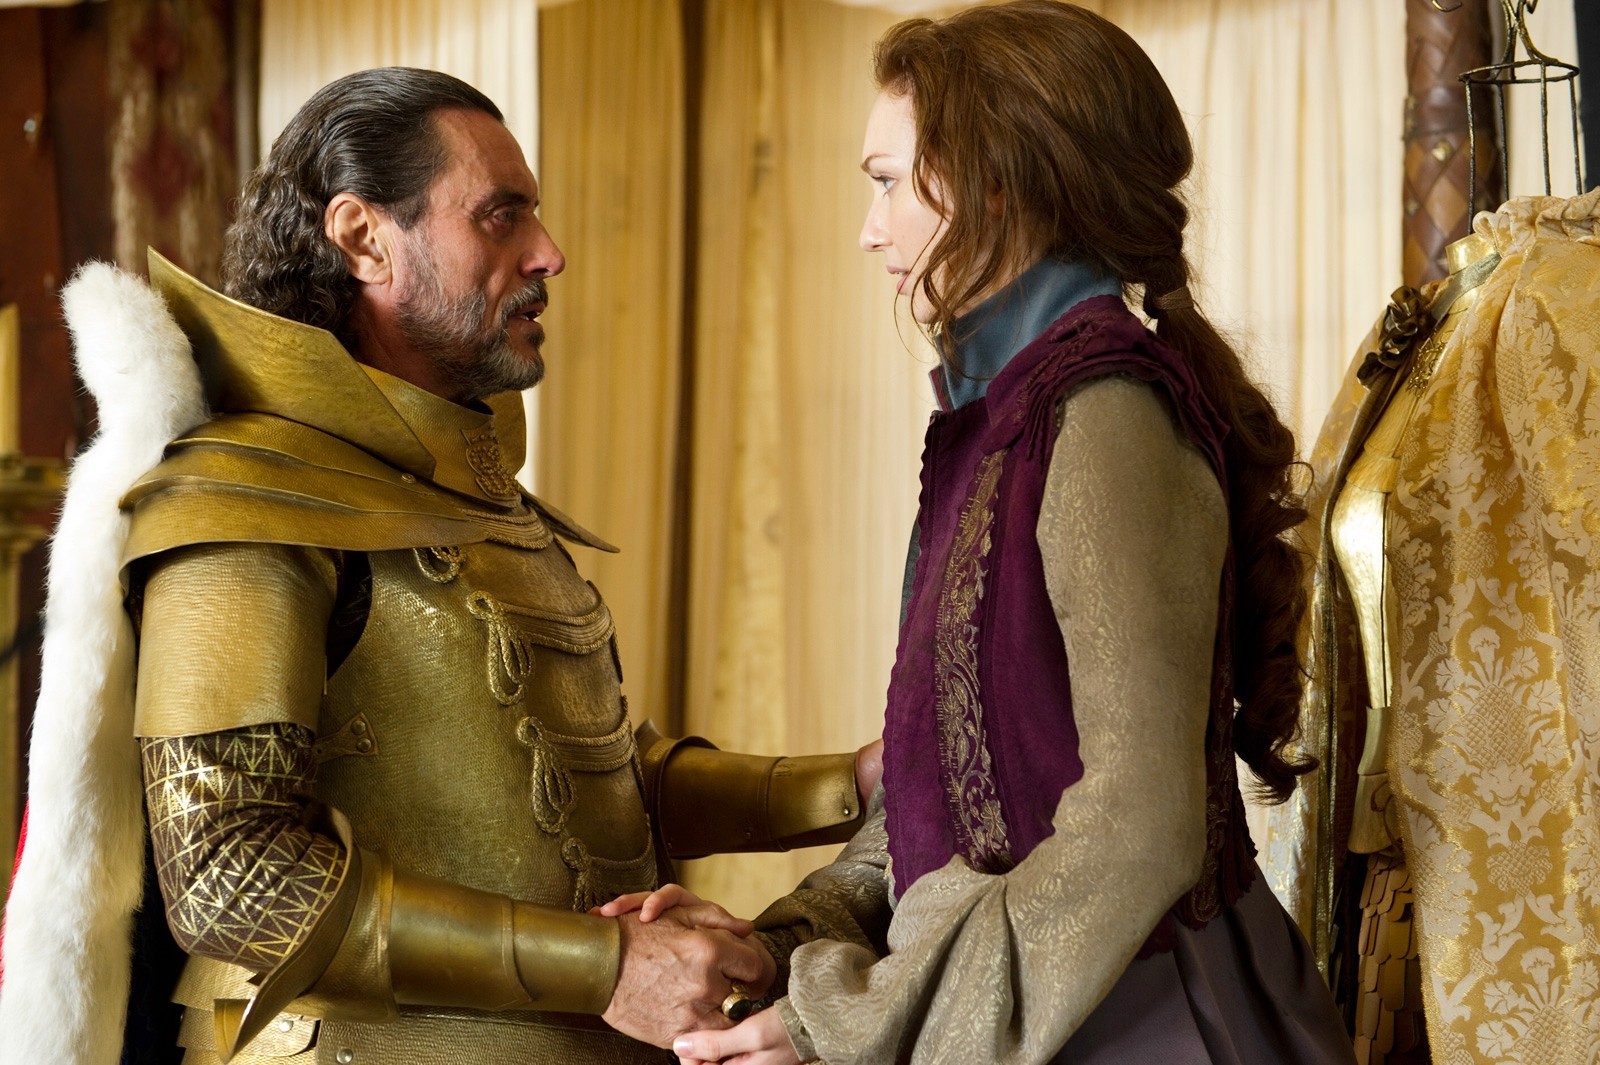 Ian McShane stars as King Brahmwell and Eleanor Tomlinson stars as Princess Isabelle in Warner Bros. Pictures' Jack the Giant Slayer (2013)